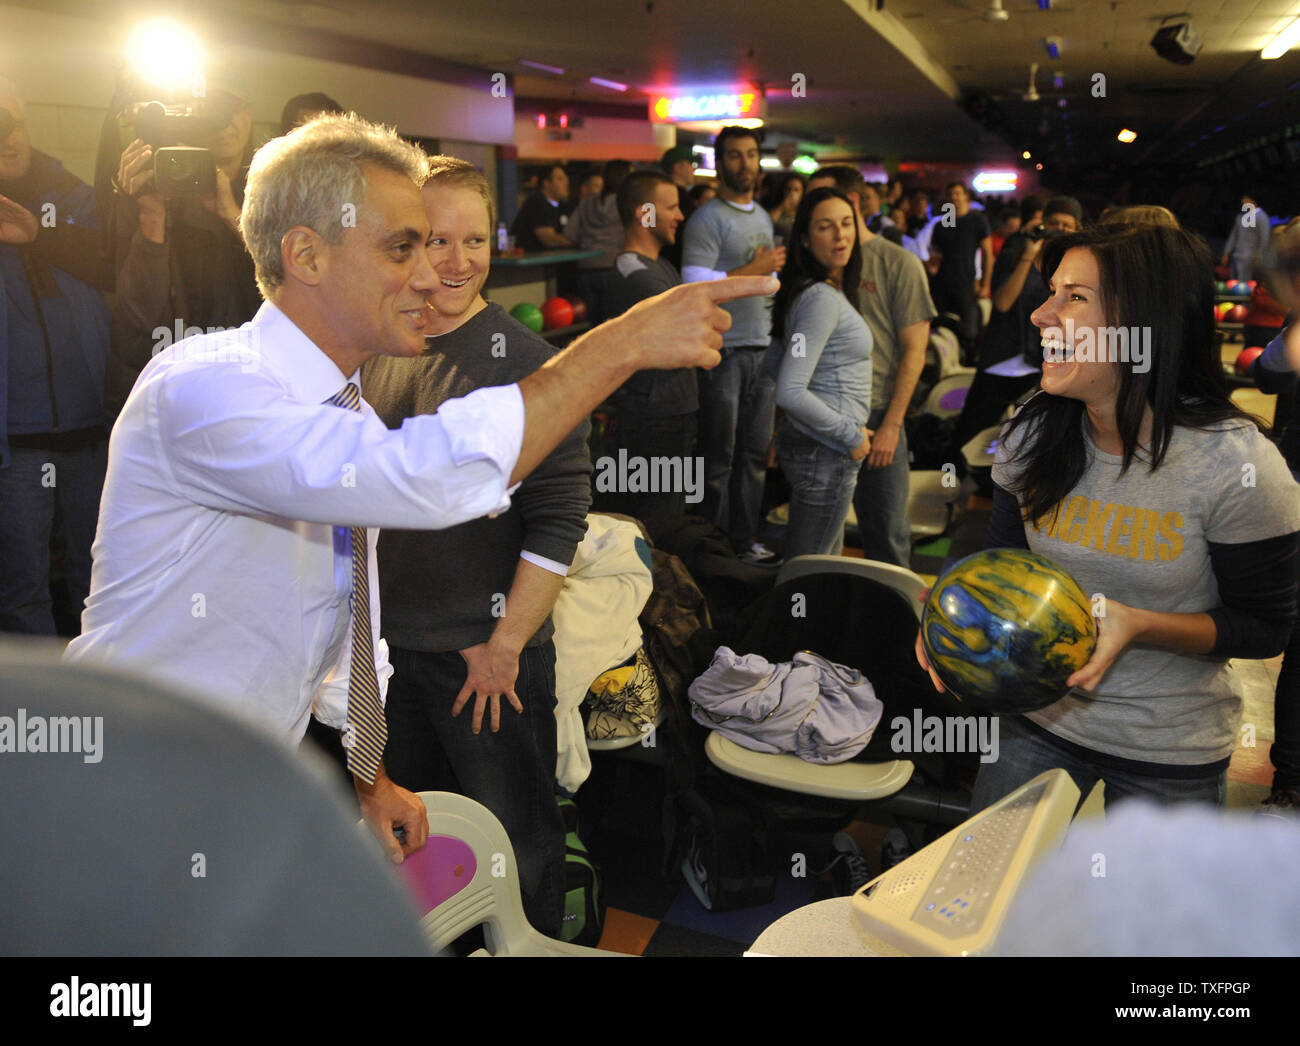 Chicago mayoral candidate Rahm Emanuel greets patrons at a bowling alley in Chicago on January 24, 2011. An Illinois appellate court threw the former congressman and White House chief of staff off the ballot ruling that he did not meet the residency requirements to run for mayor of Chicago.      UPI/Brian Kersey Stock Photo